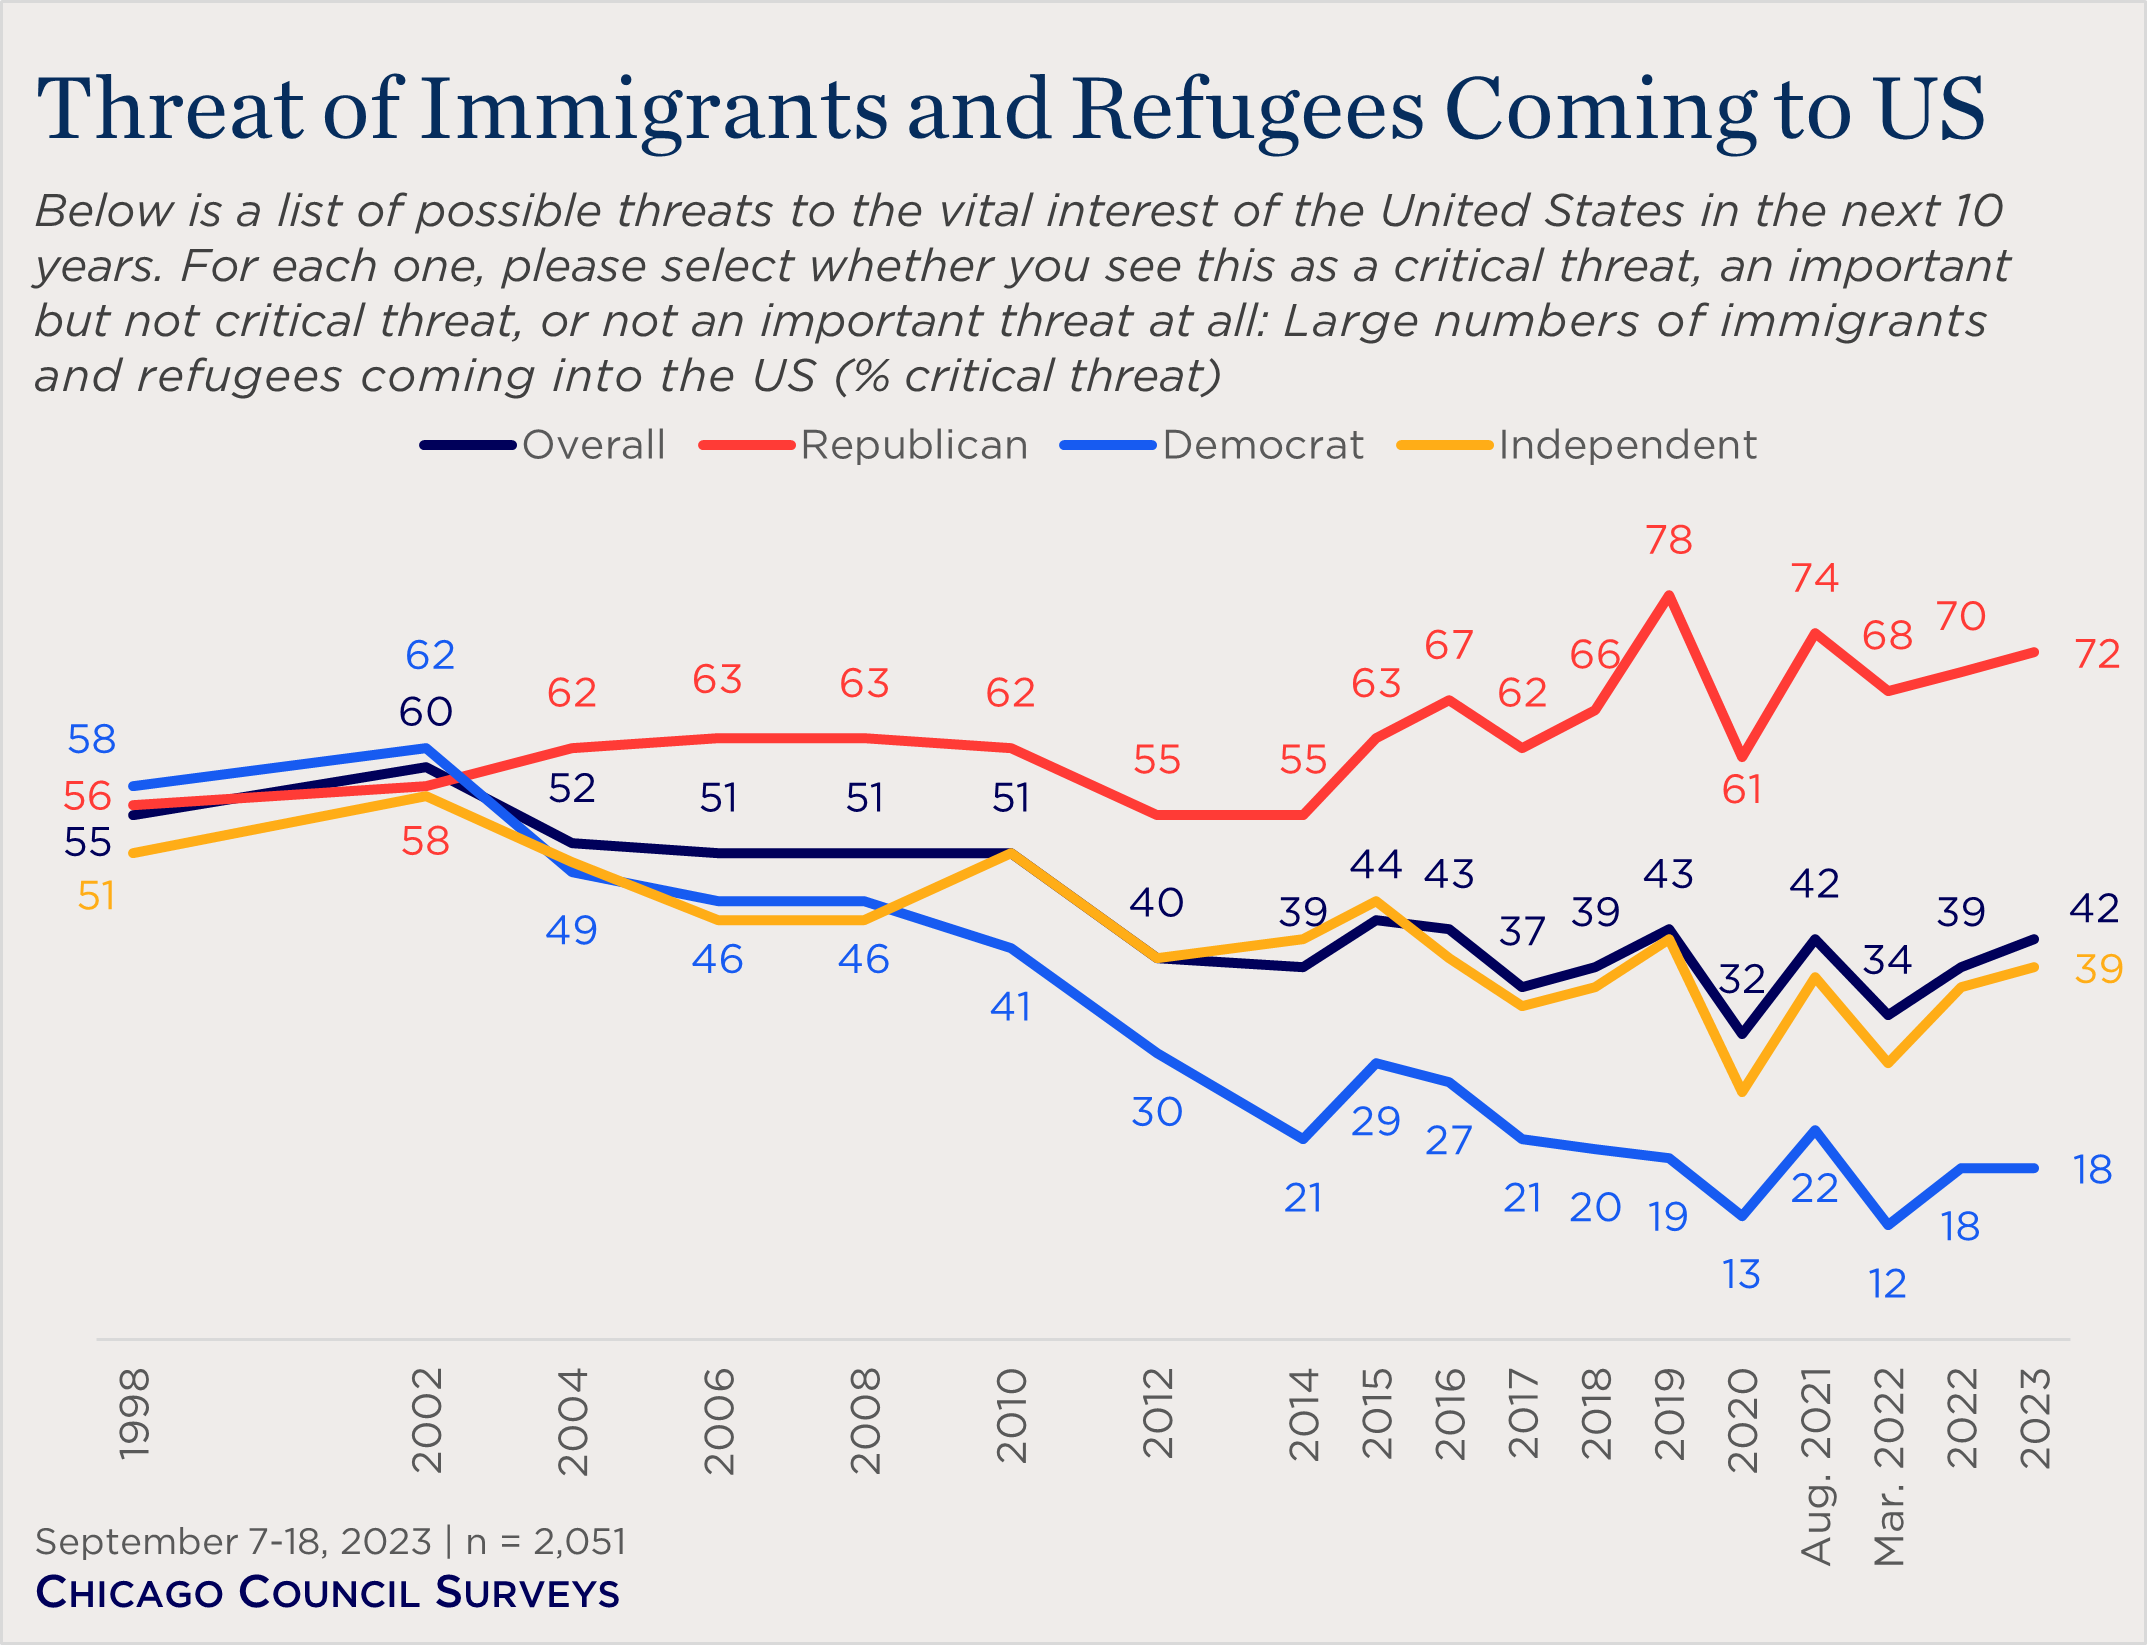 "line chart showing partisan views on the threat of immigration"